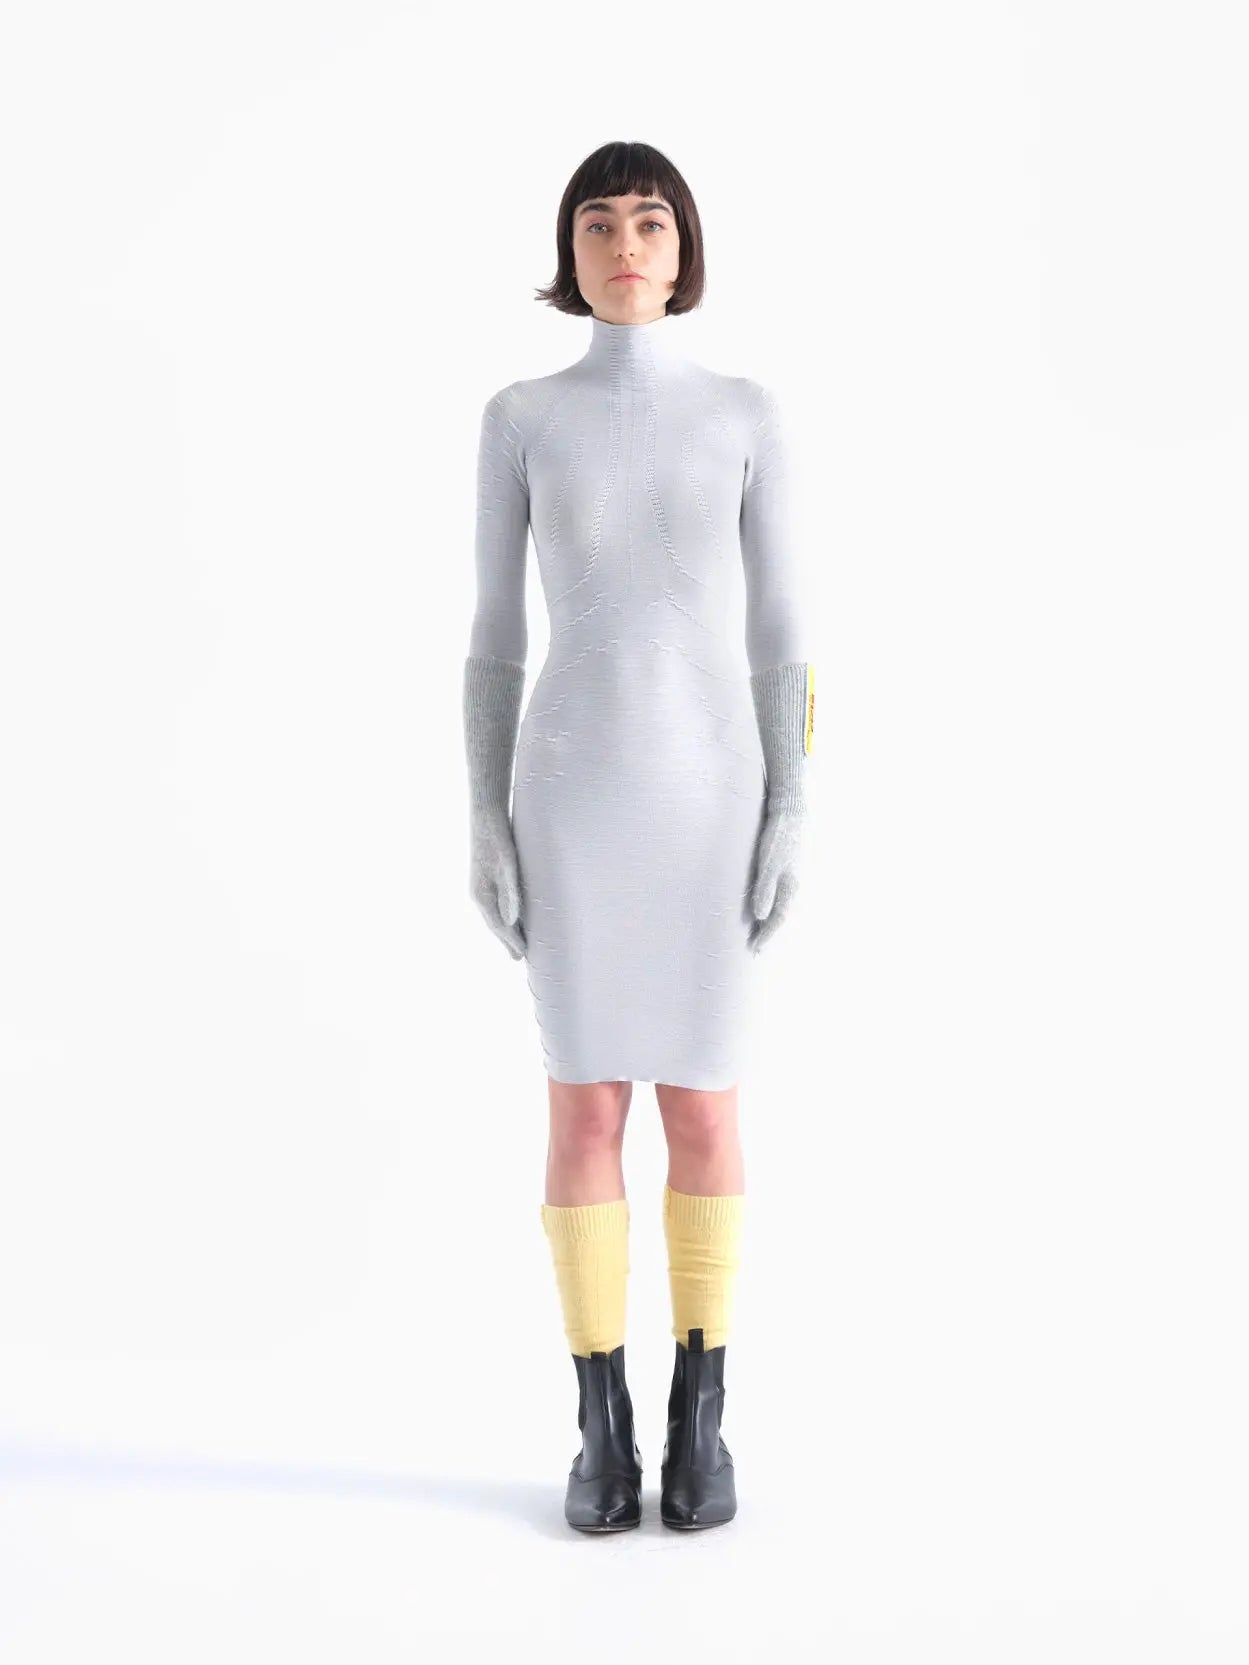 A person with short hair stands facing forward on a plain white background. They are dressed in a form-fitting, long-sleeved, light gray Rai Dress Grey from Bielo, with large gray mittens covering their hands, yellow leg warmers, and black ankle boots.